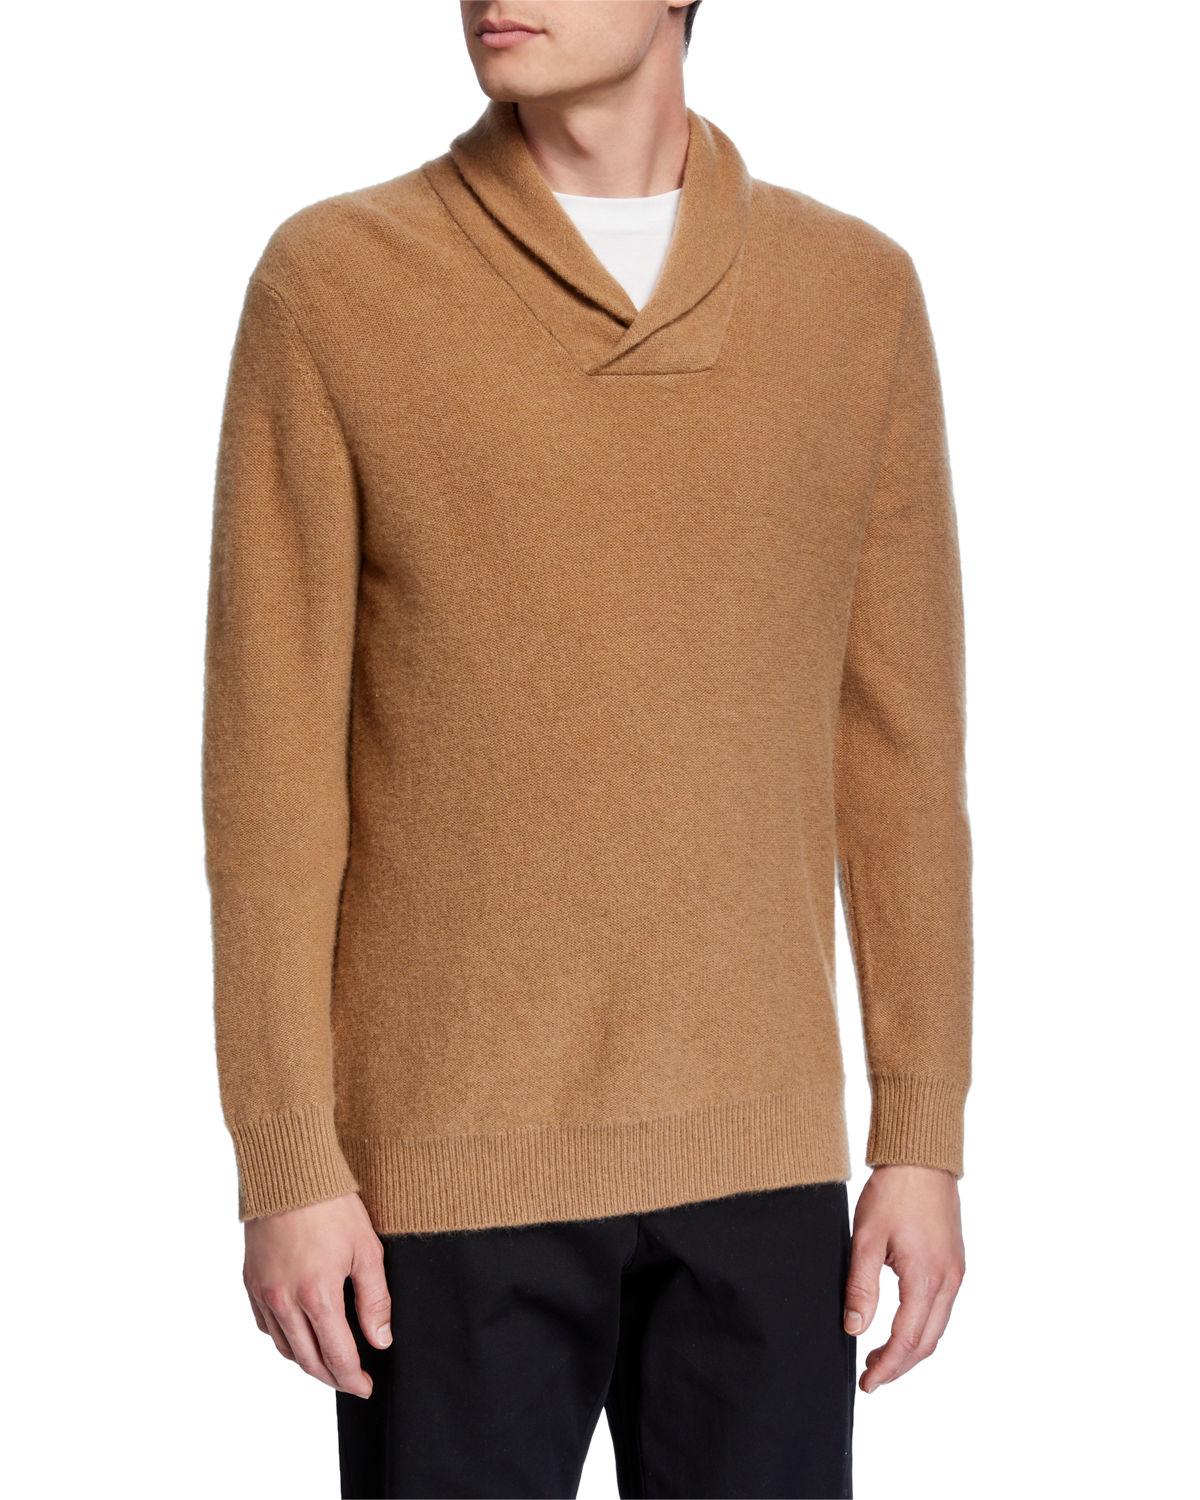 Vince Men's Cashmere Shawl Collar Popover Sweater in Camel (Natural ...